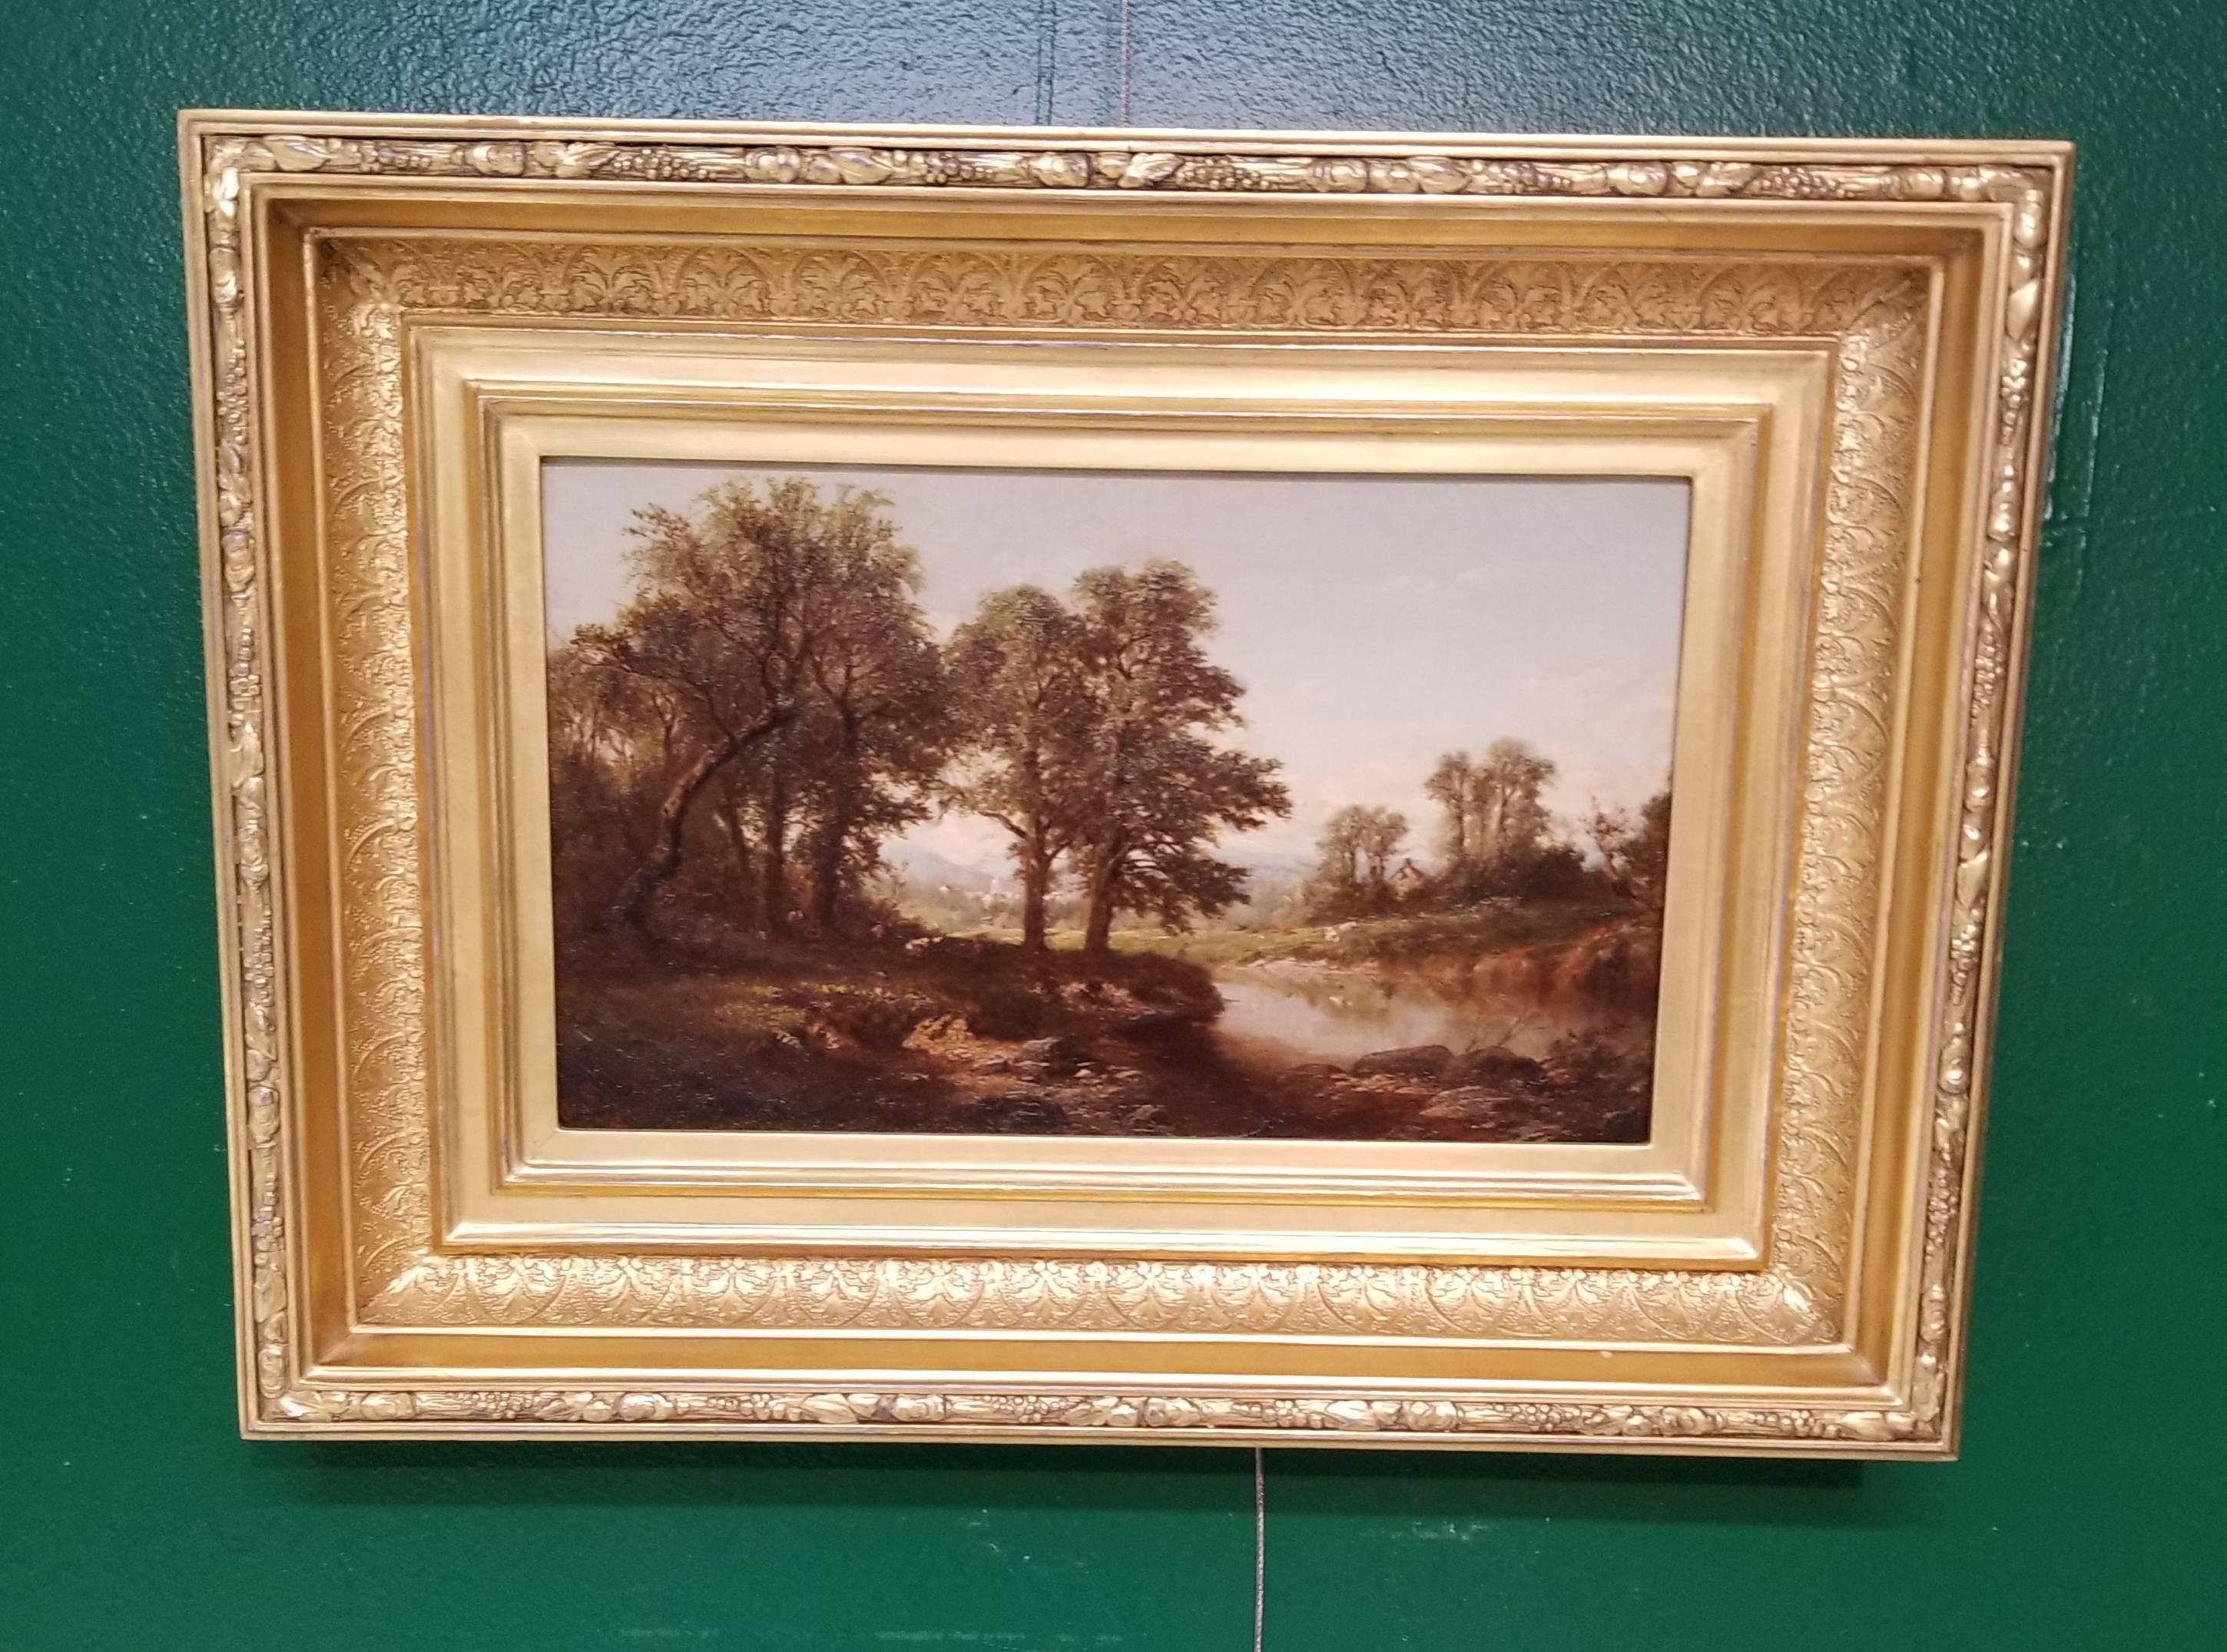 Landscape (Possibly Bronx, NY) - Painting by James Smillie